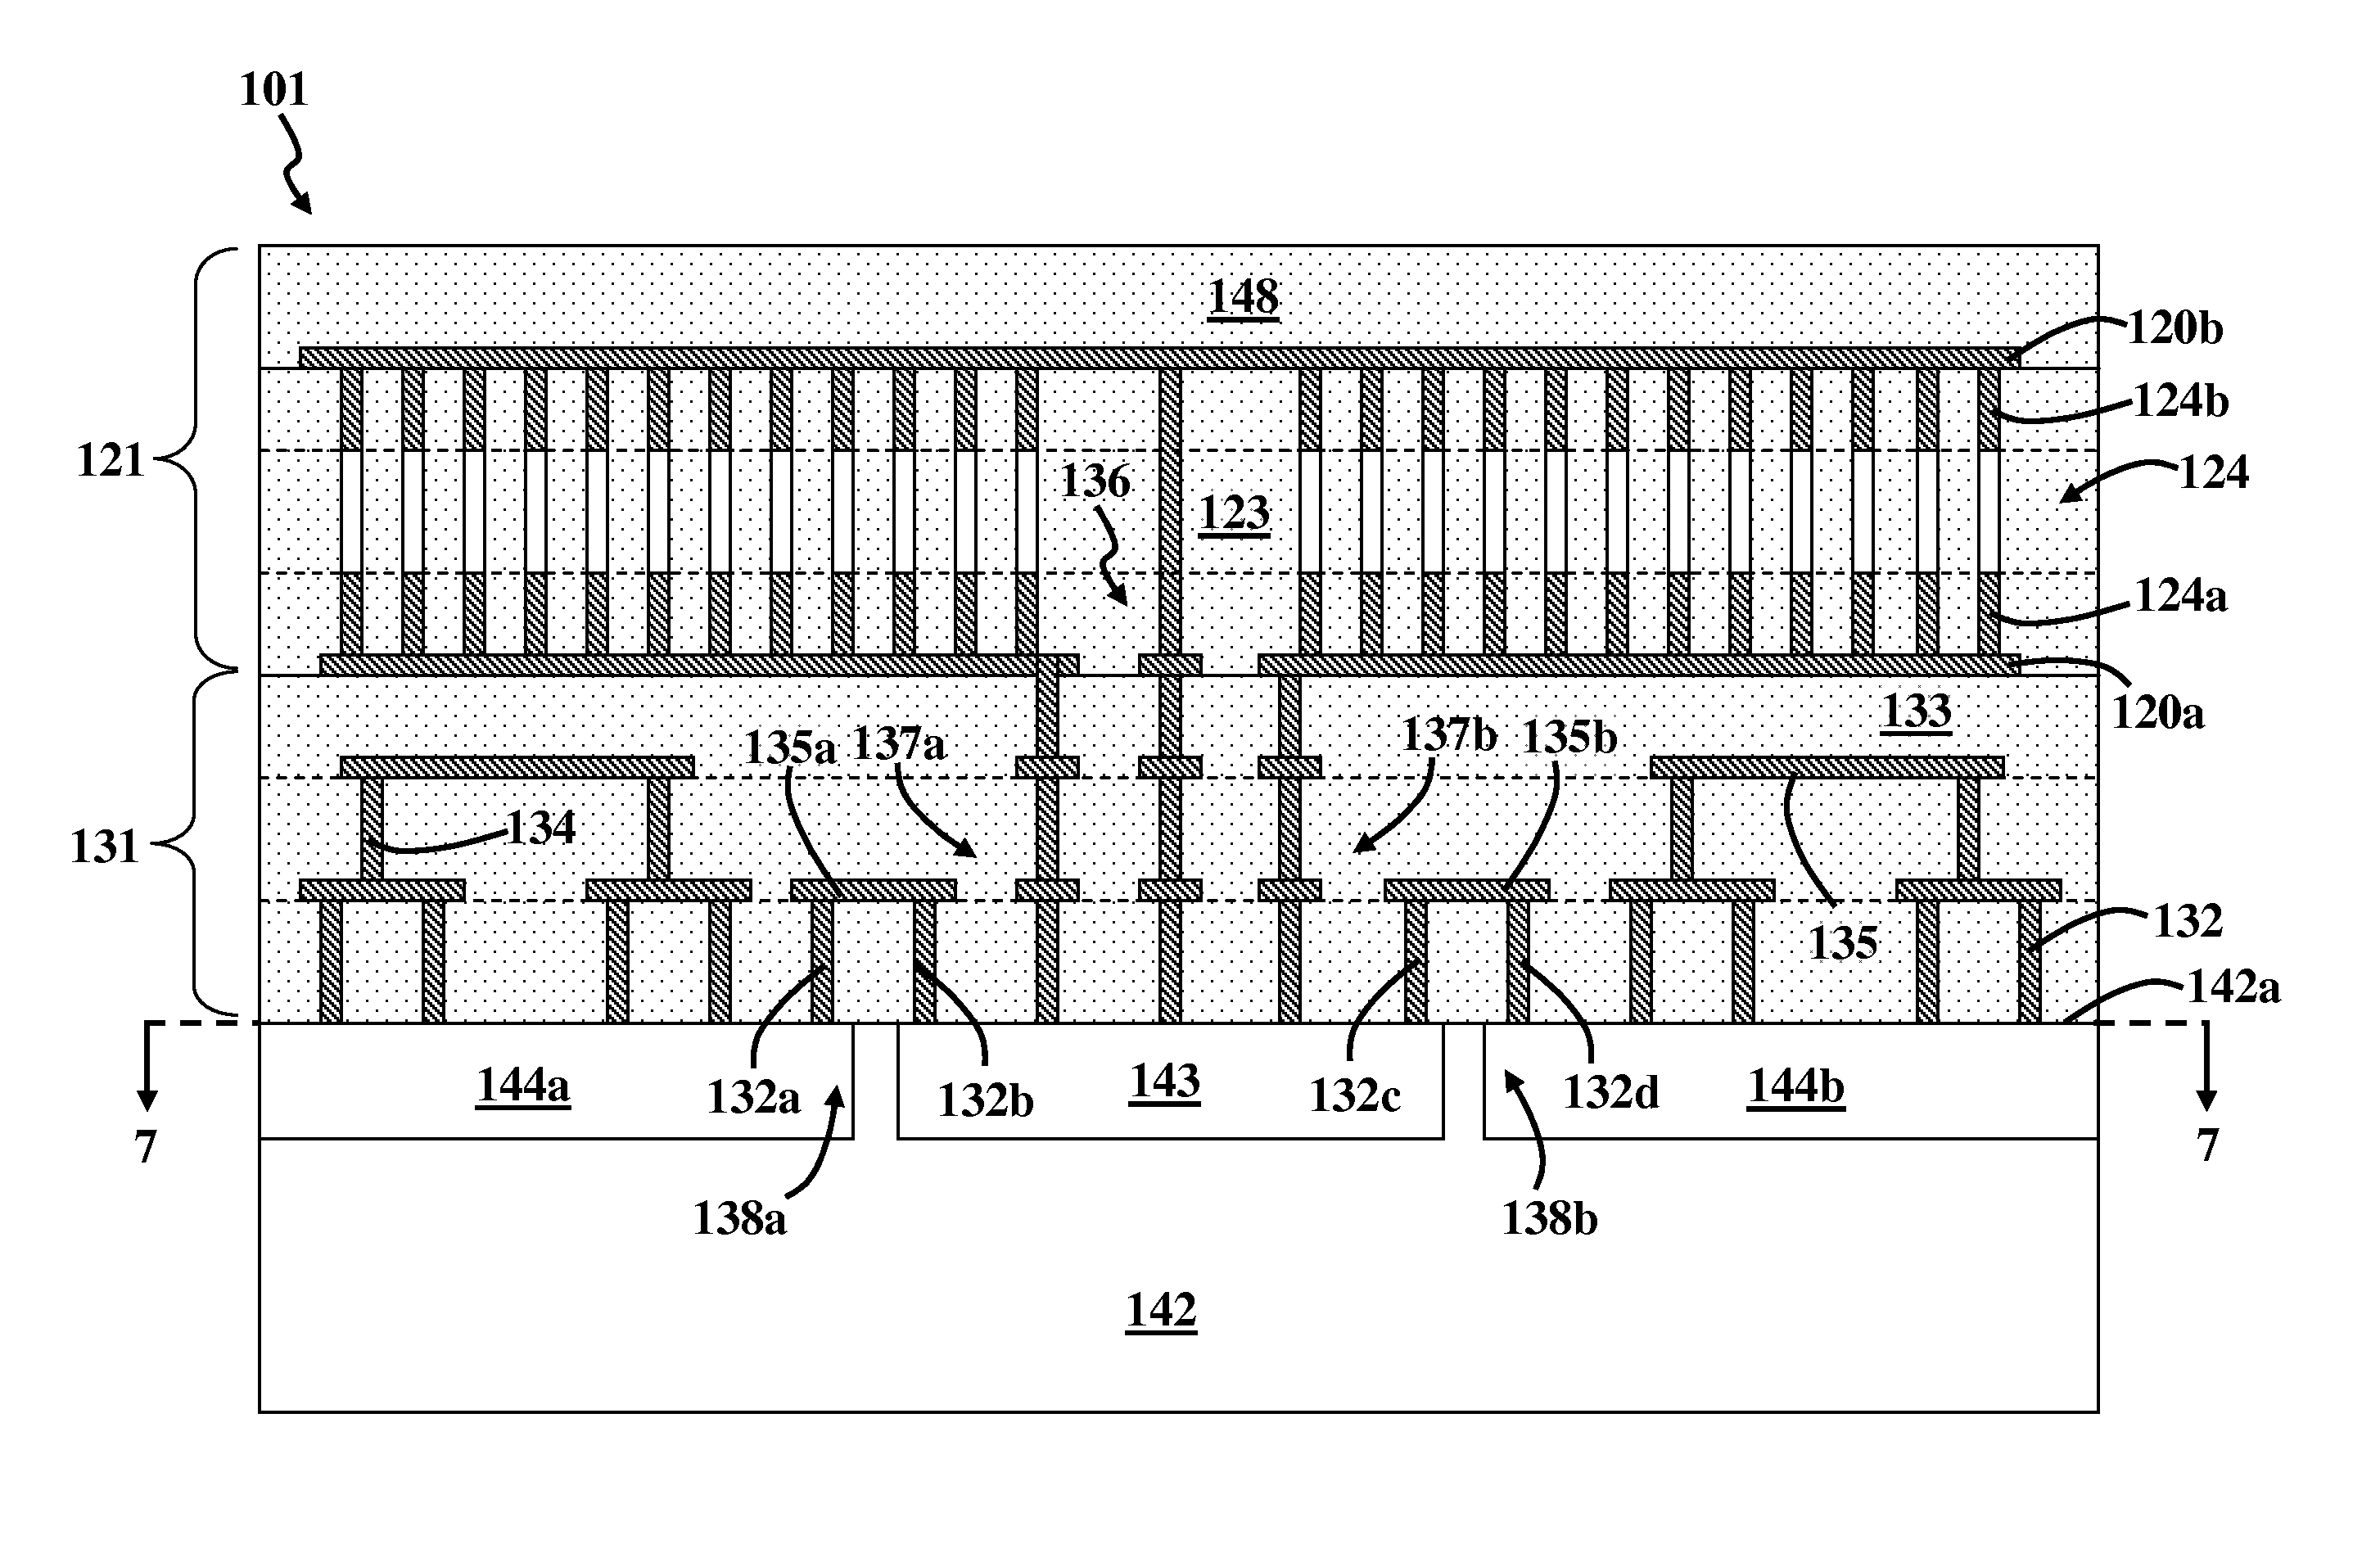 Electronic circuit with embedded memory